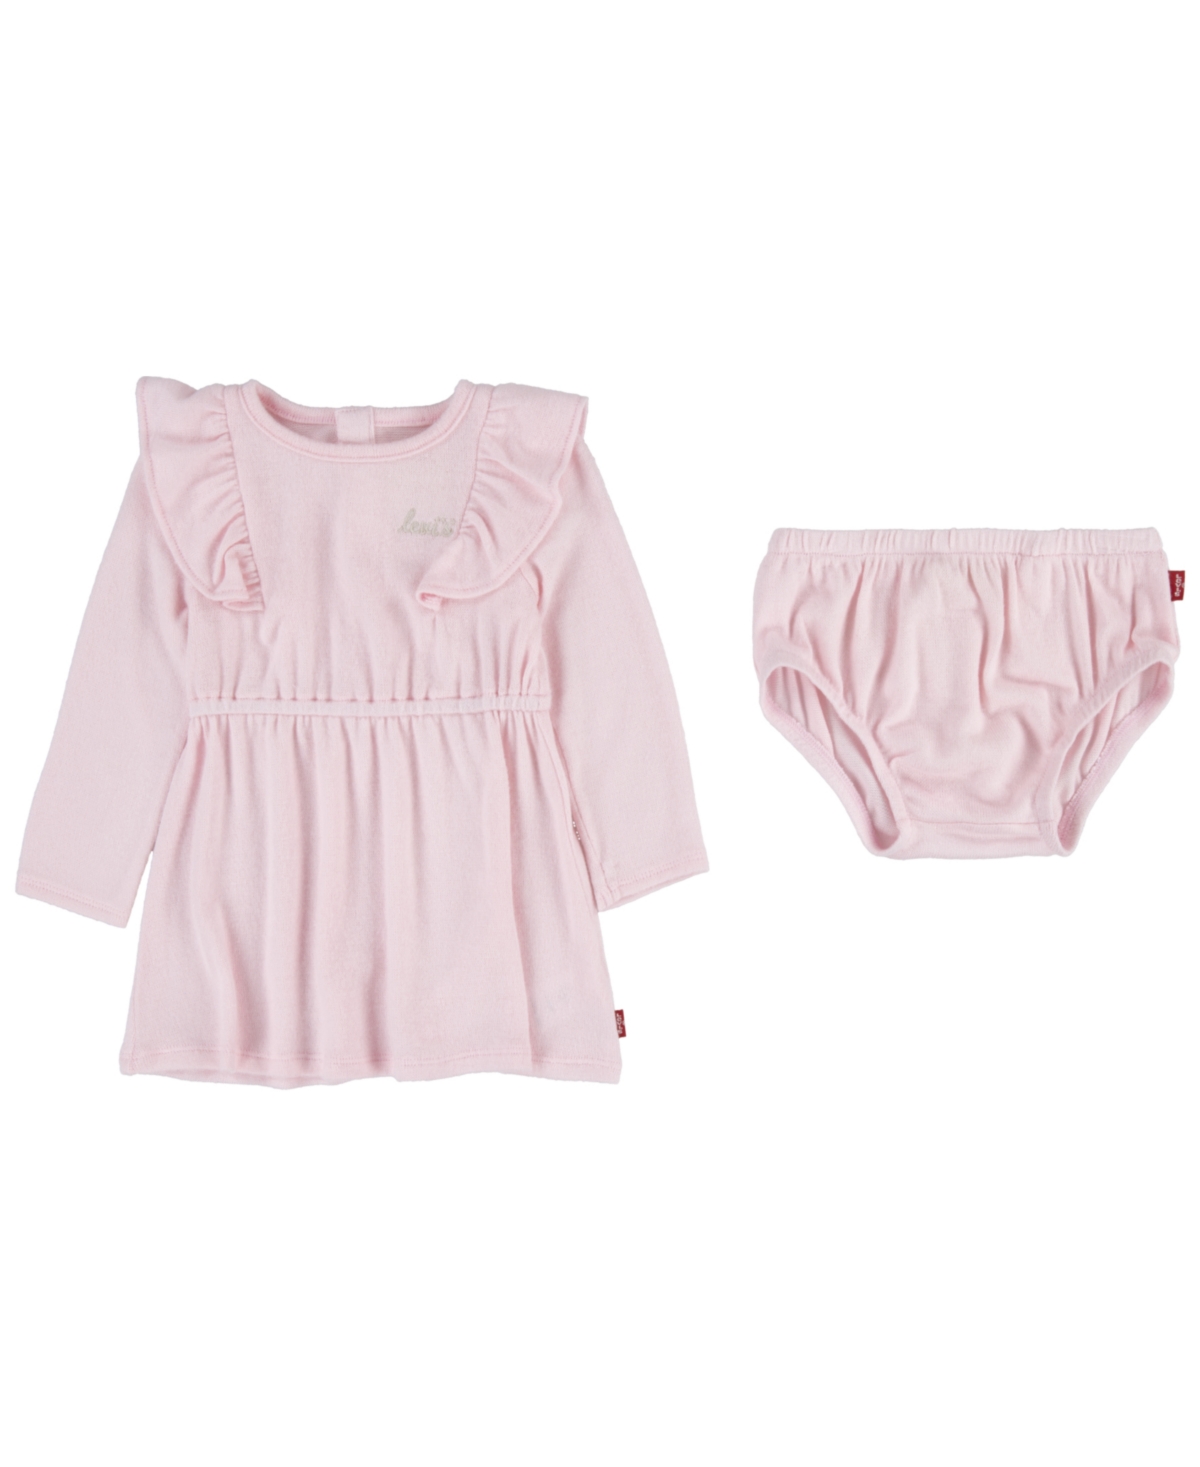 Levi's Baby Girls Long Sleeve Hacci Knit Dress And Diaper Cover Set In Bridal Rose